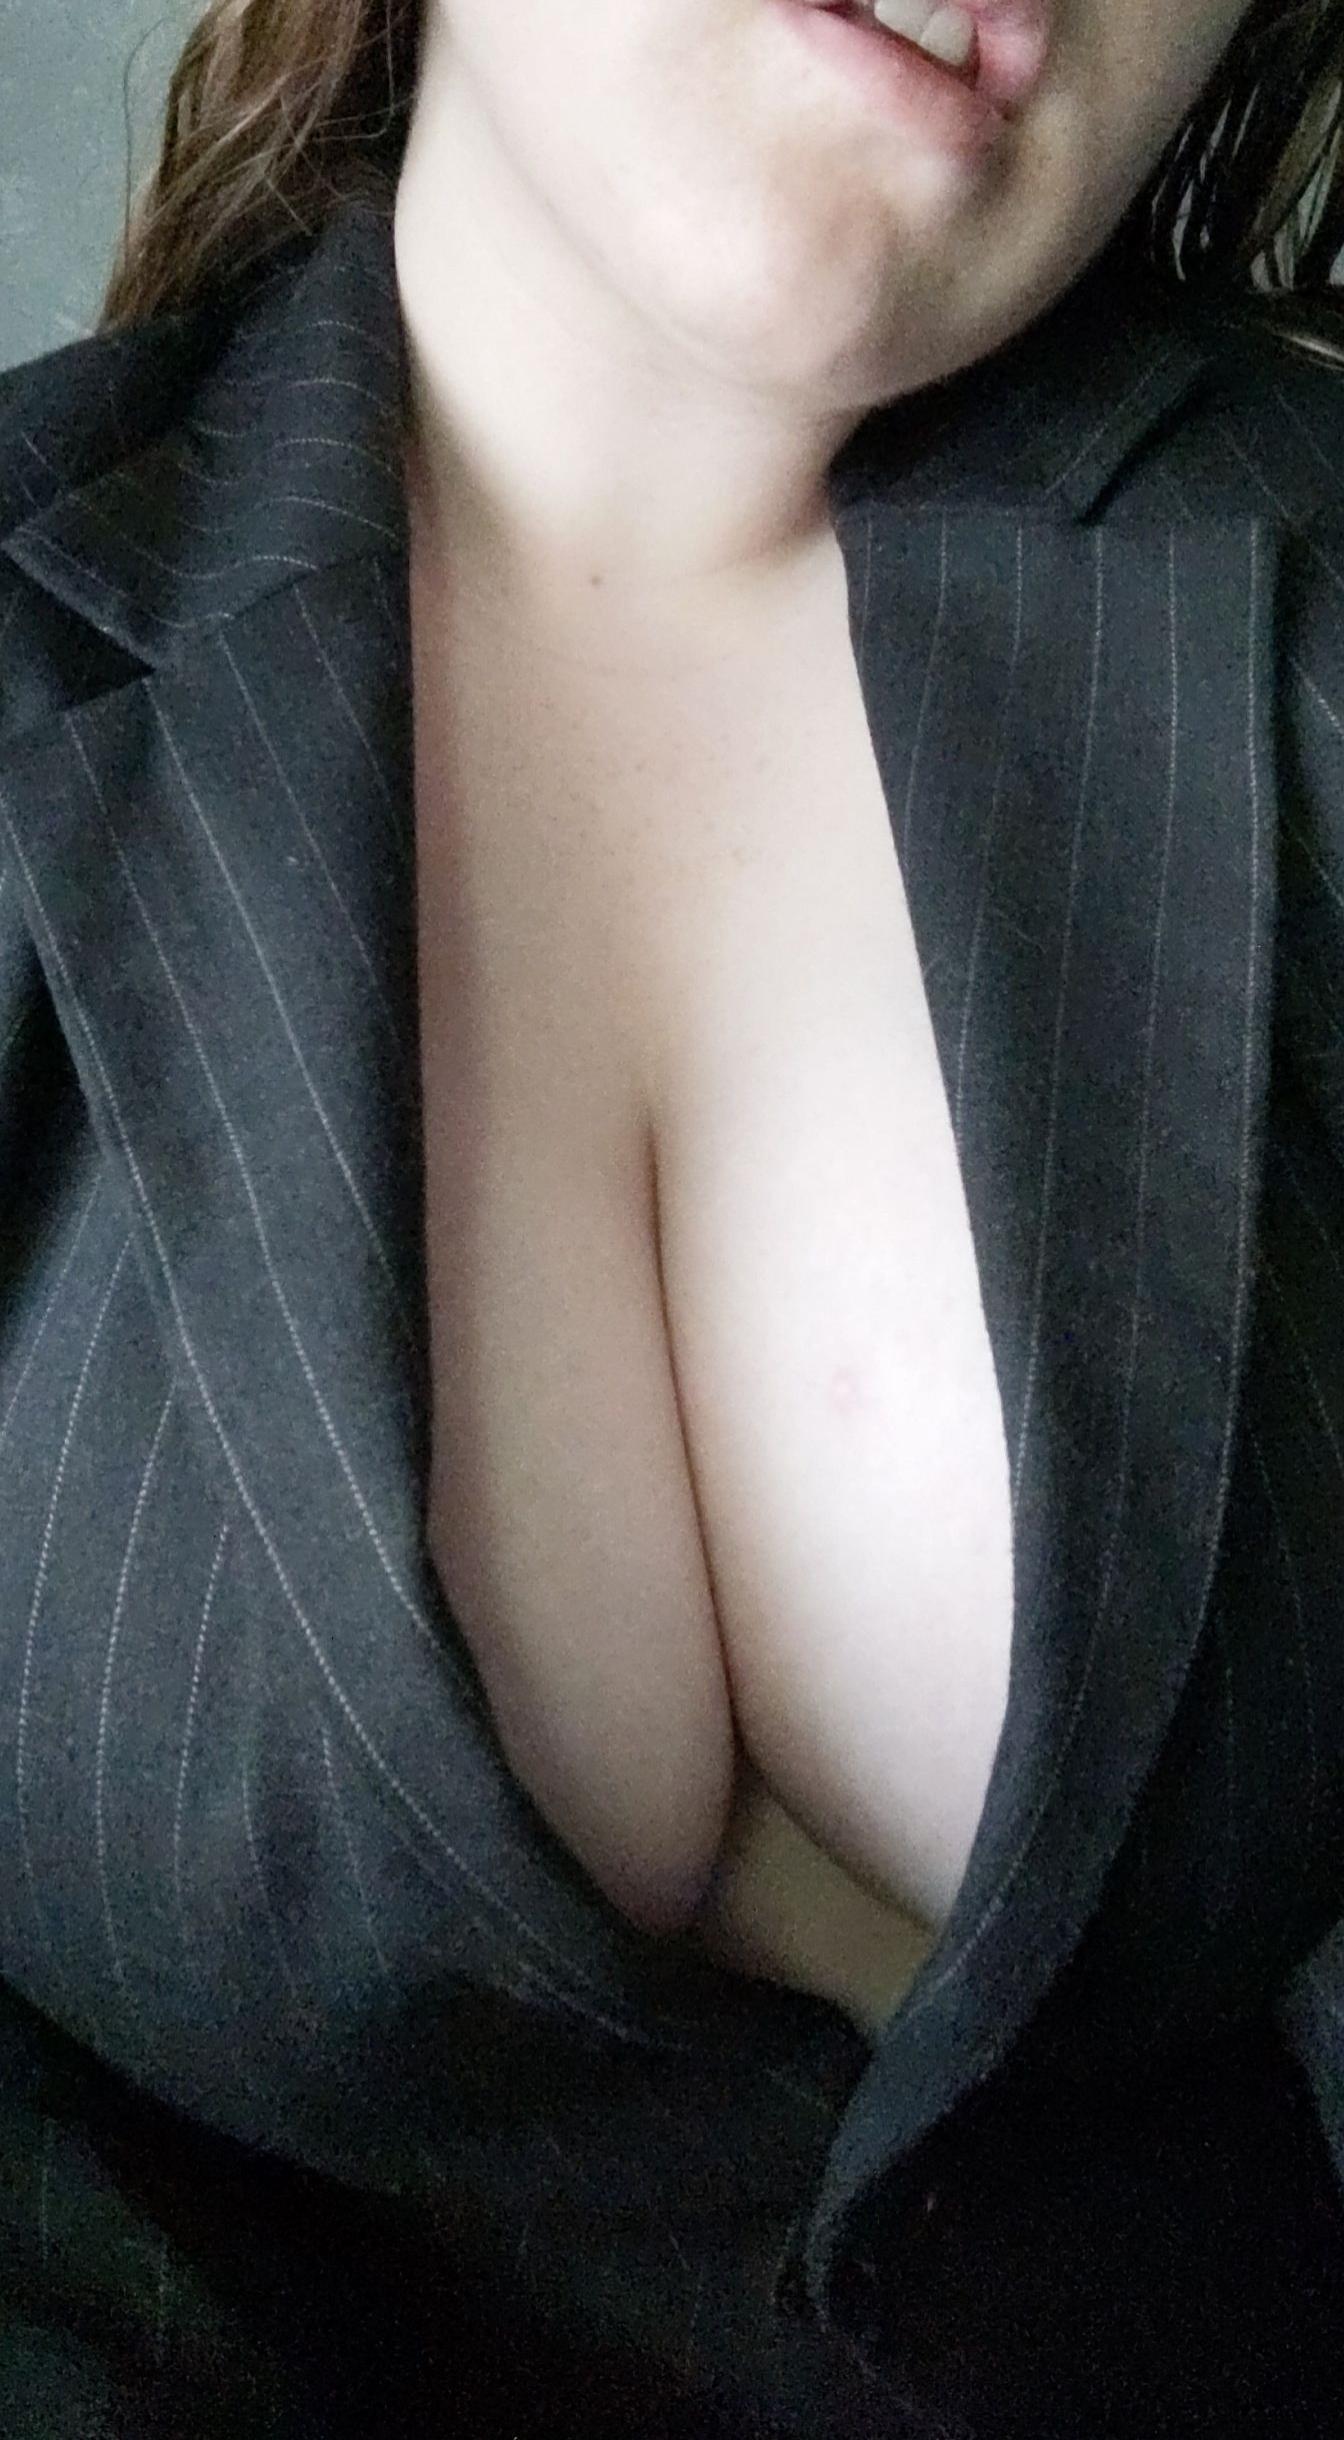 I think this might be a bit too casual for business casual (not sure if this subthis site wants ages, but i'm 20!)